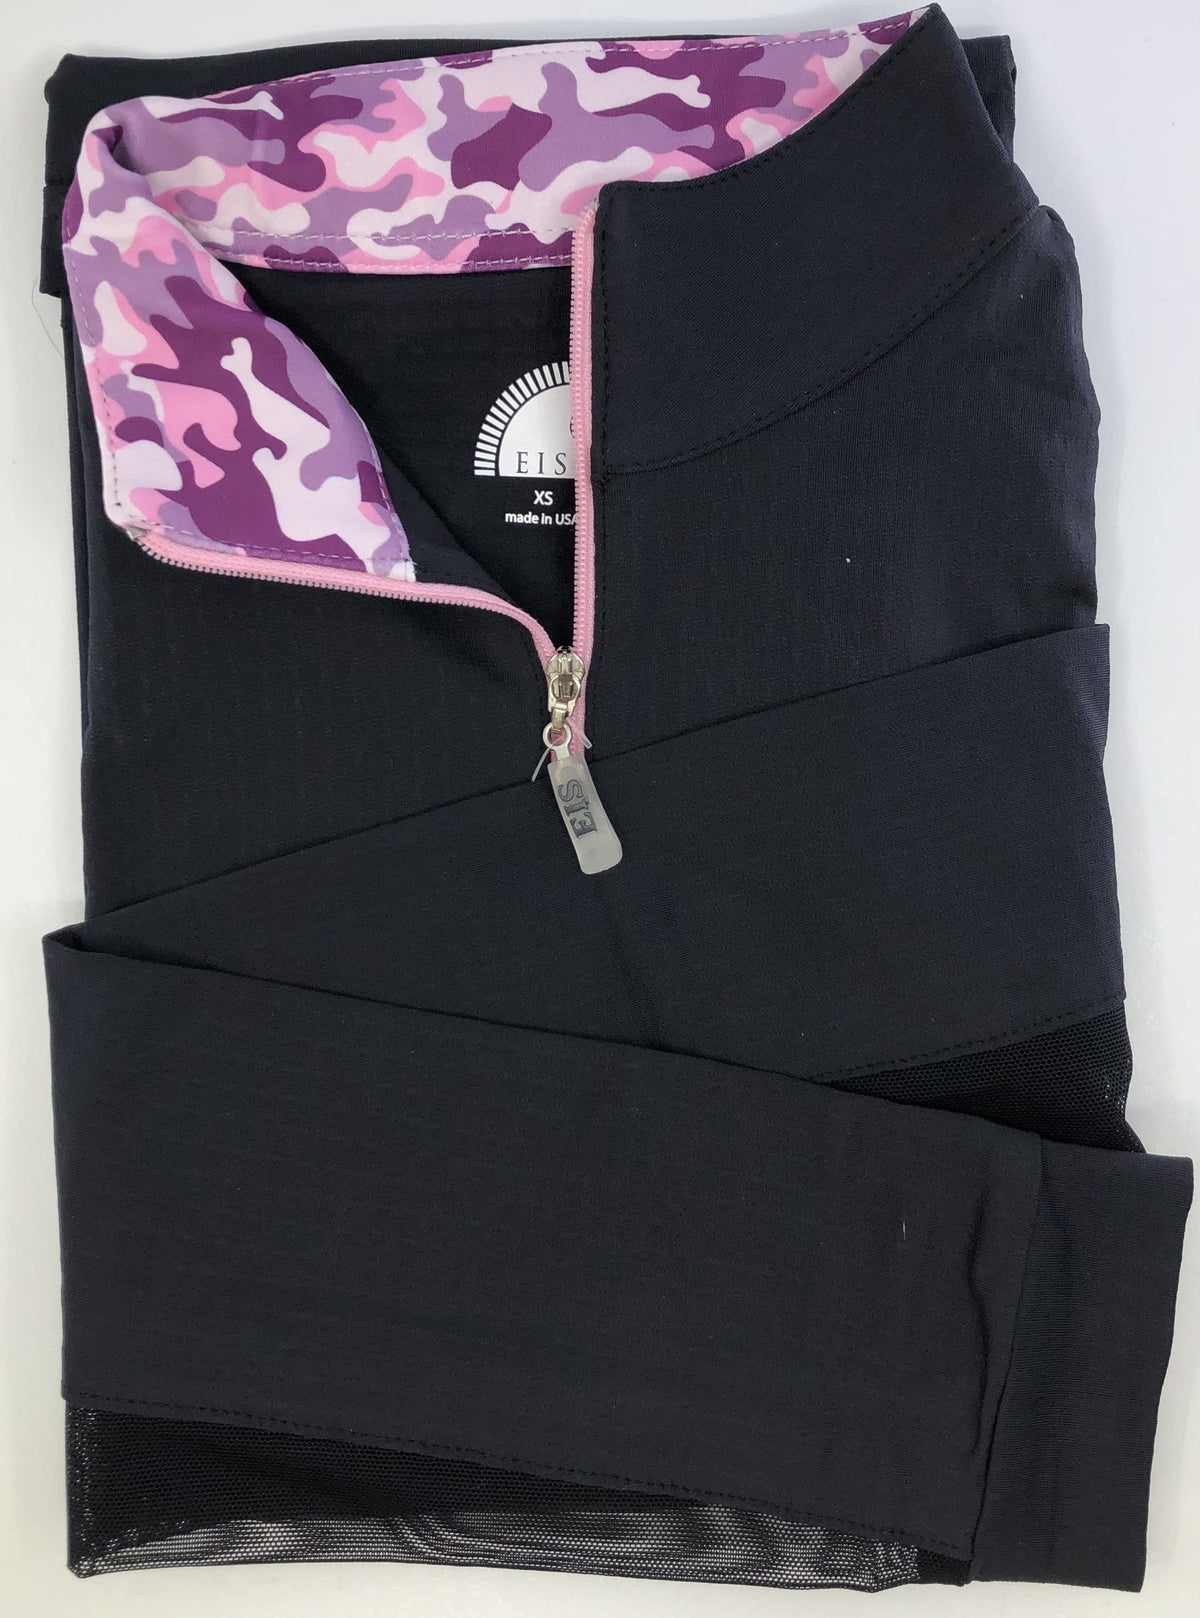 EIS Custom Team Shirts Black/Pink Camo EIS- Sunshirts (XS) equestrian team apparel online tack store mobile tack store custom farm apparel custom show stable clothing equestrian lifestyle horse show clothing riding clothes horses equestrian tack store